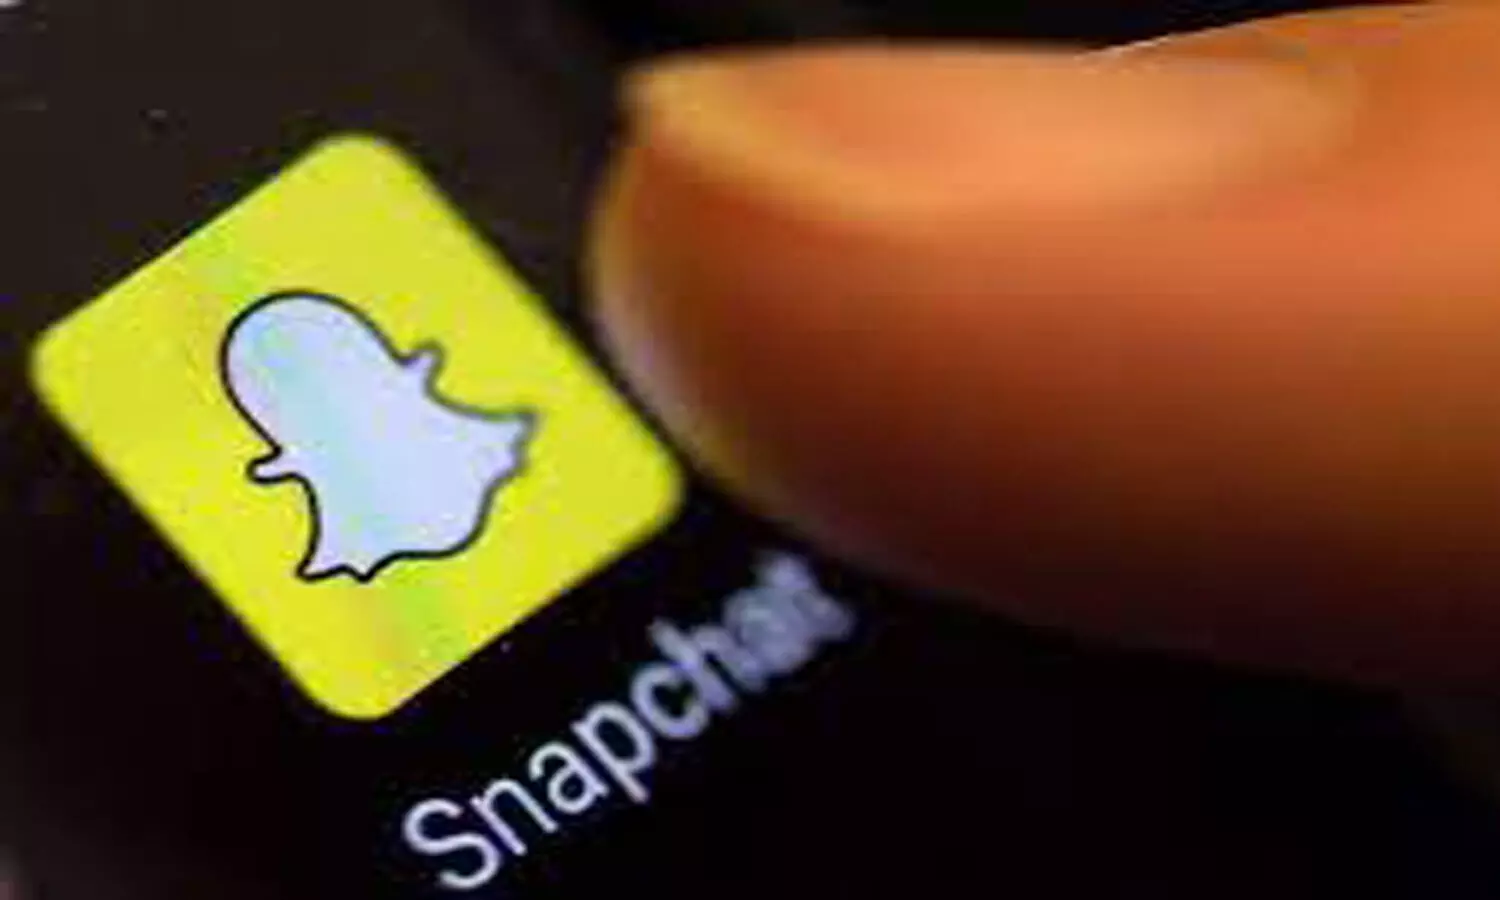 Take screenshots on Snapchat without letting your friends know; heres how